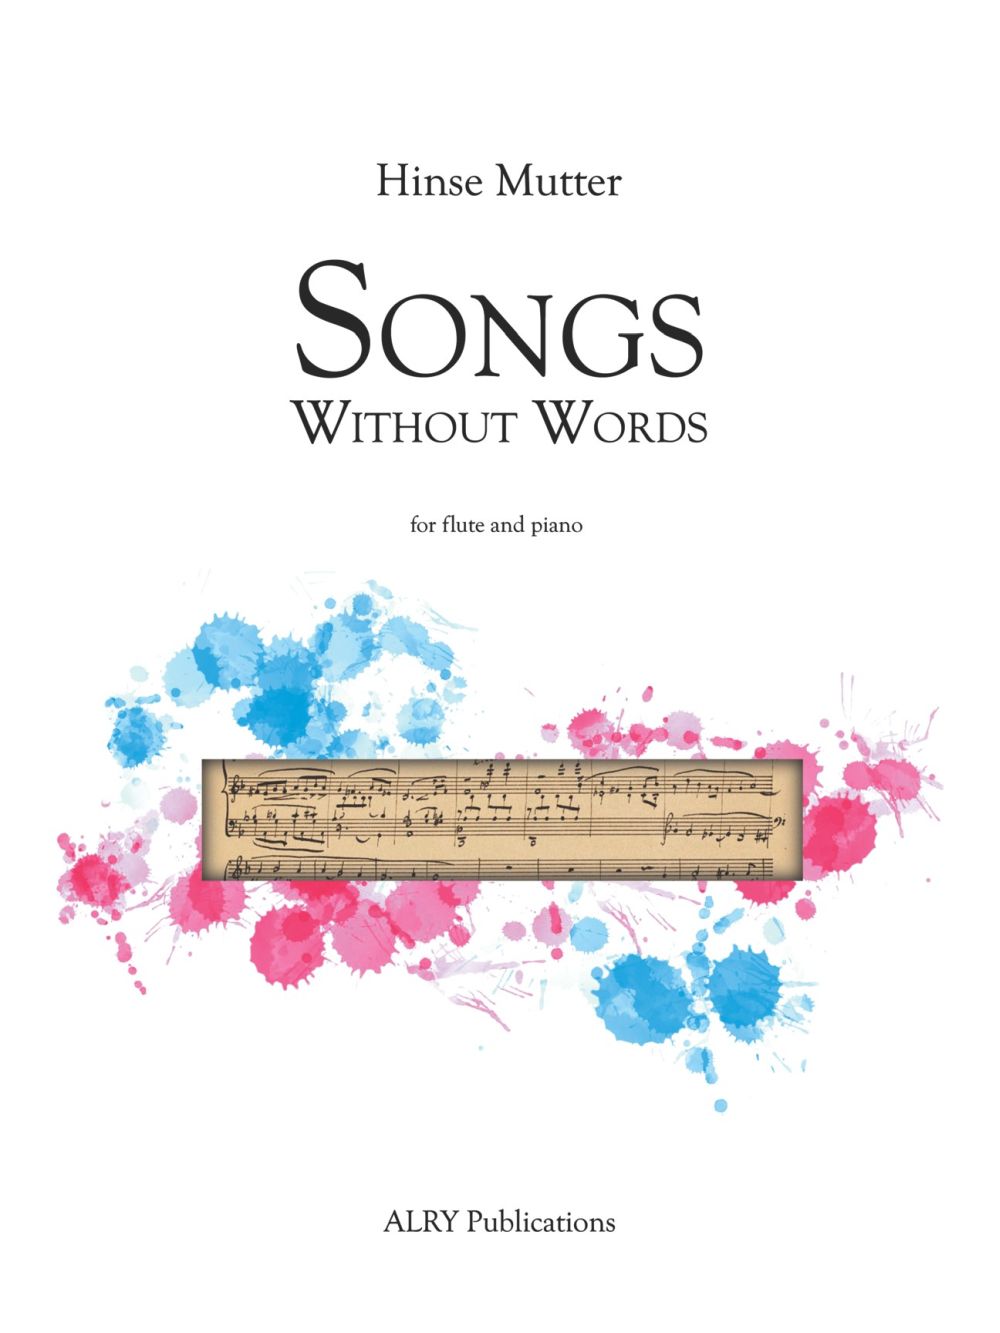 3 Songs Without Words (MUTTER HINSE)